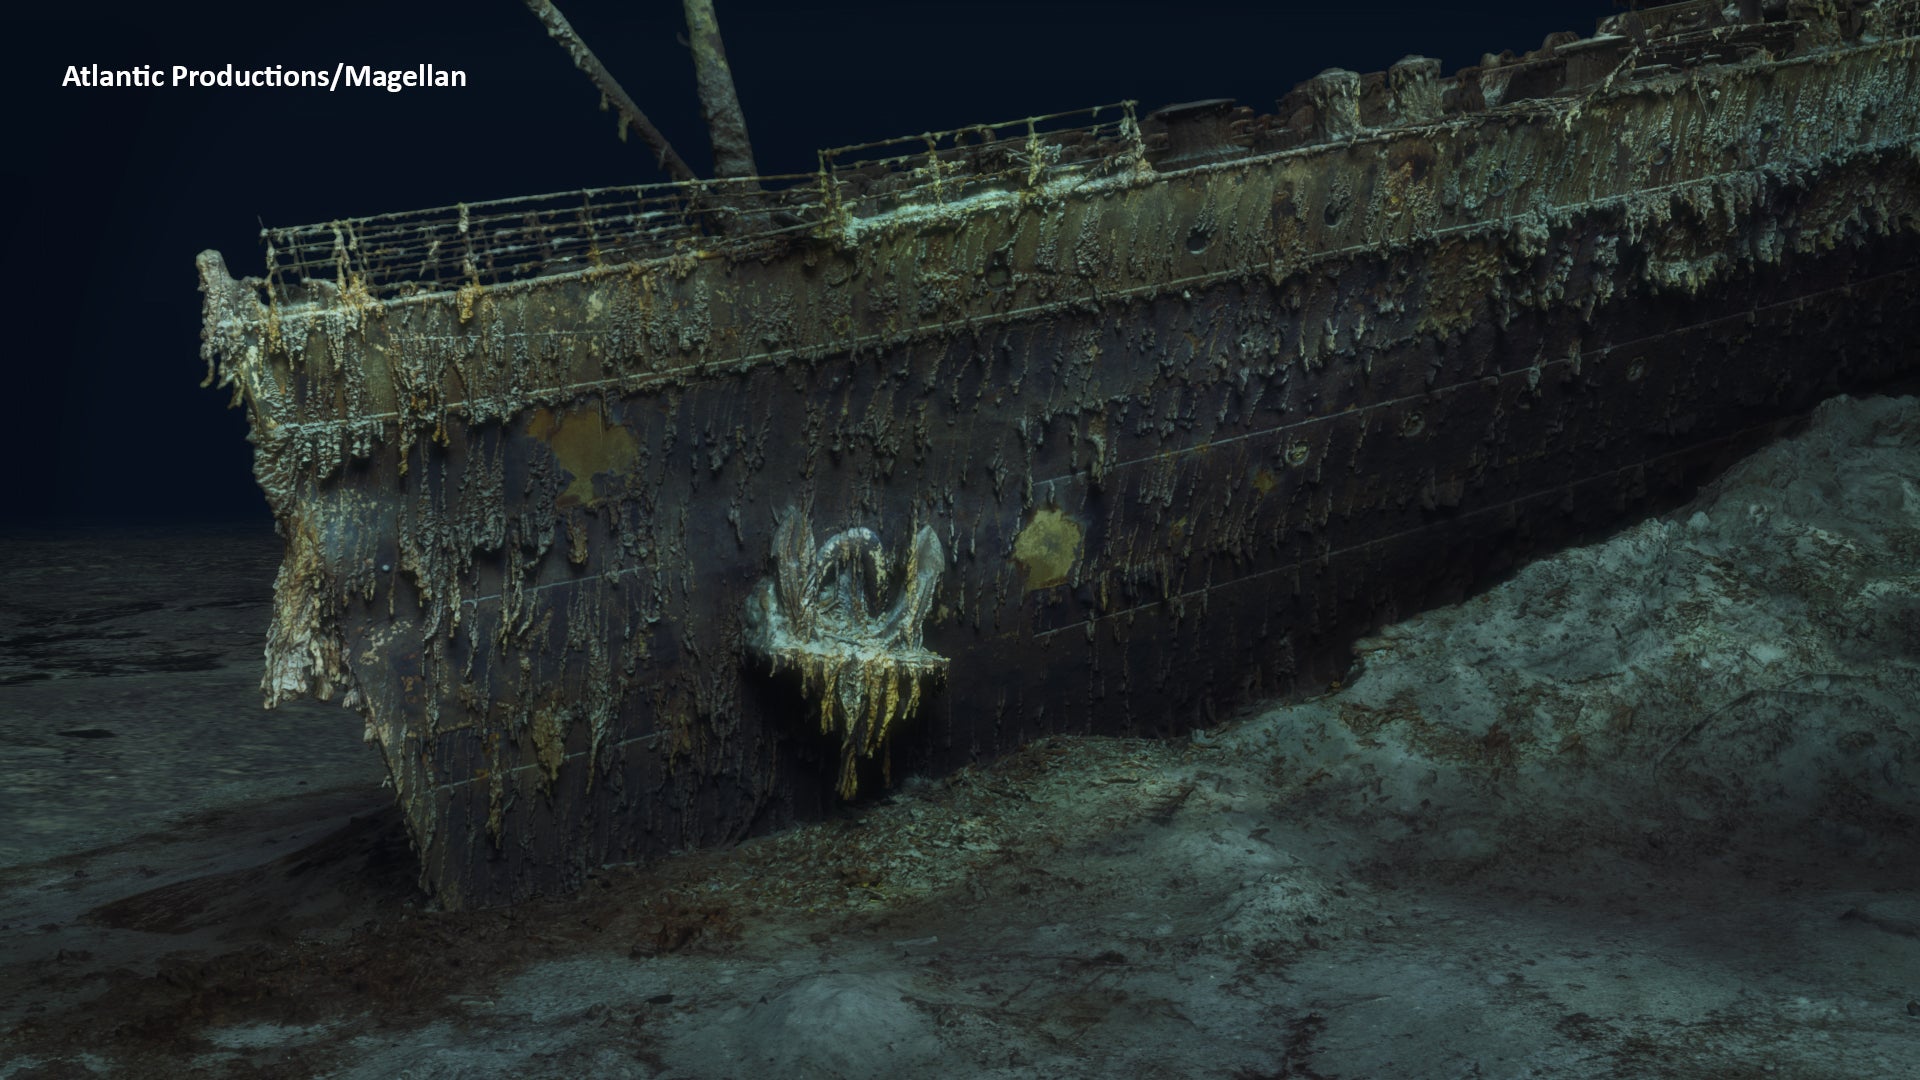 3D scan of Titanic hull wreckage